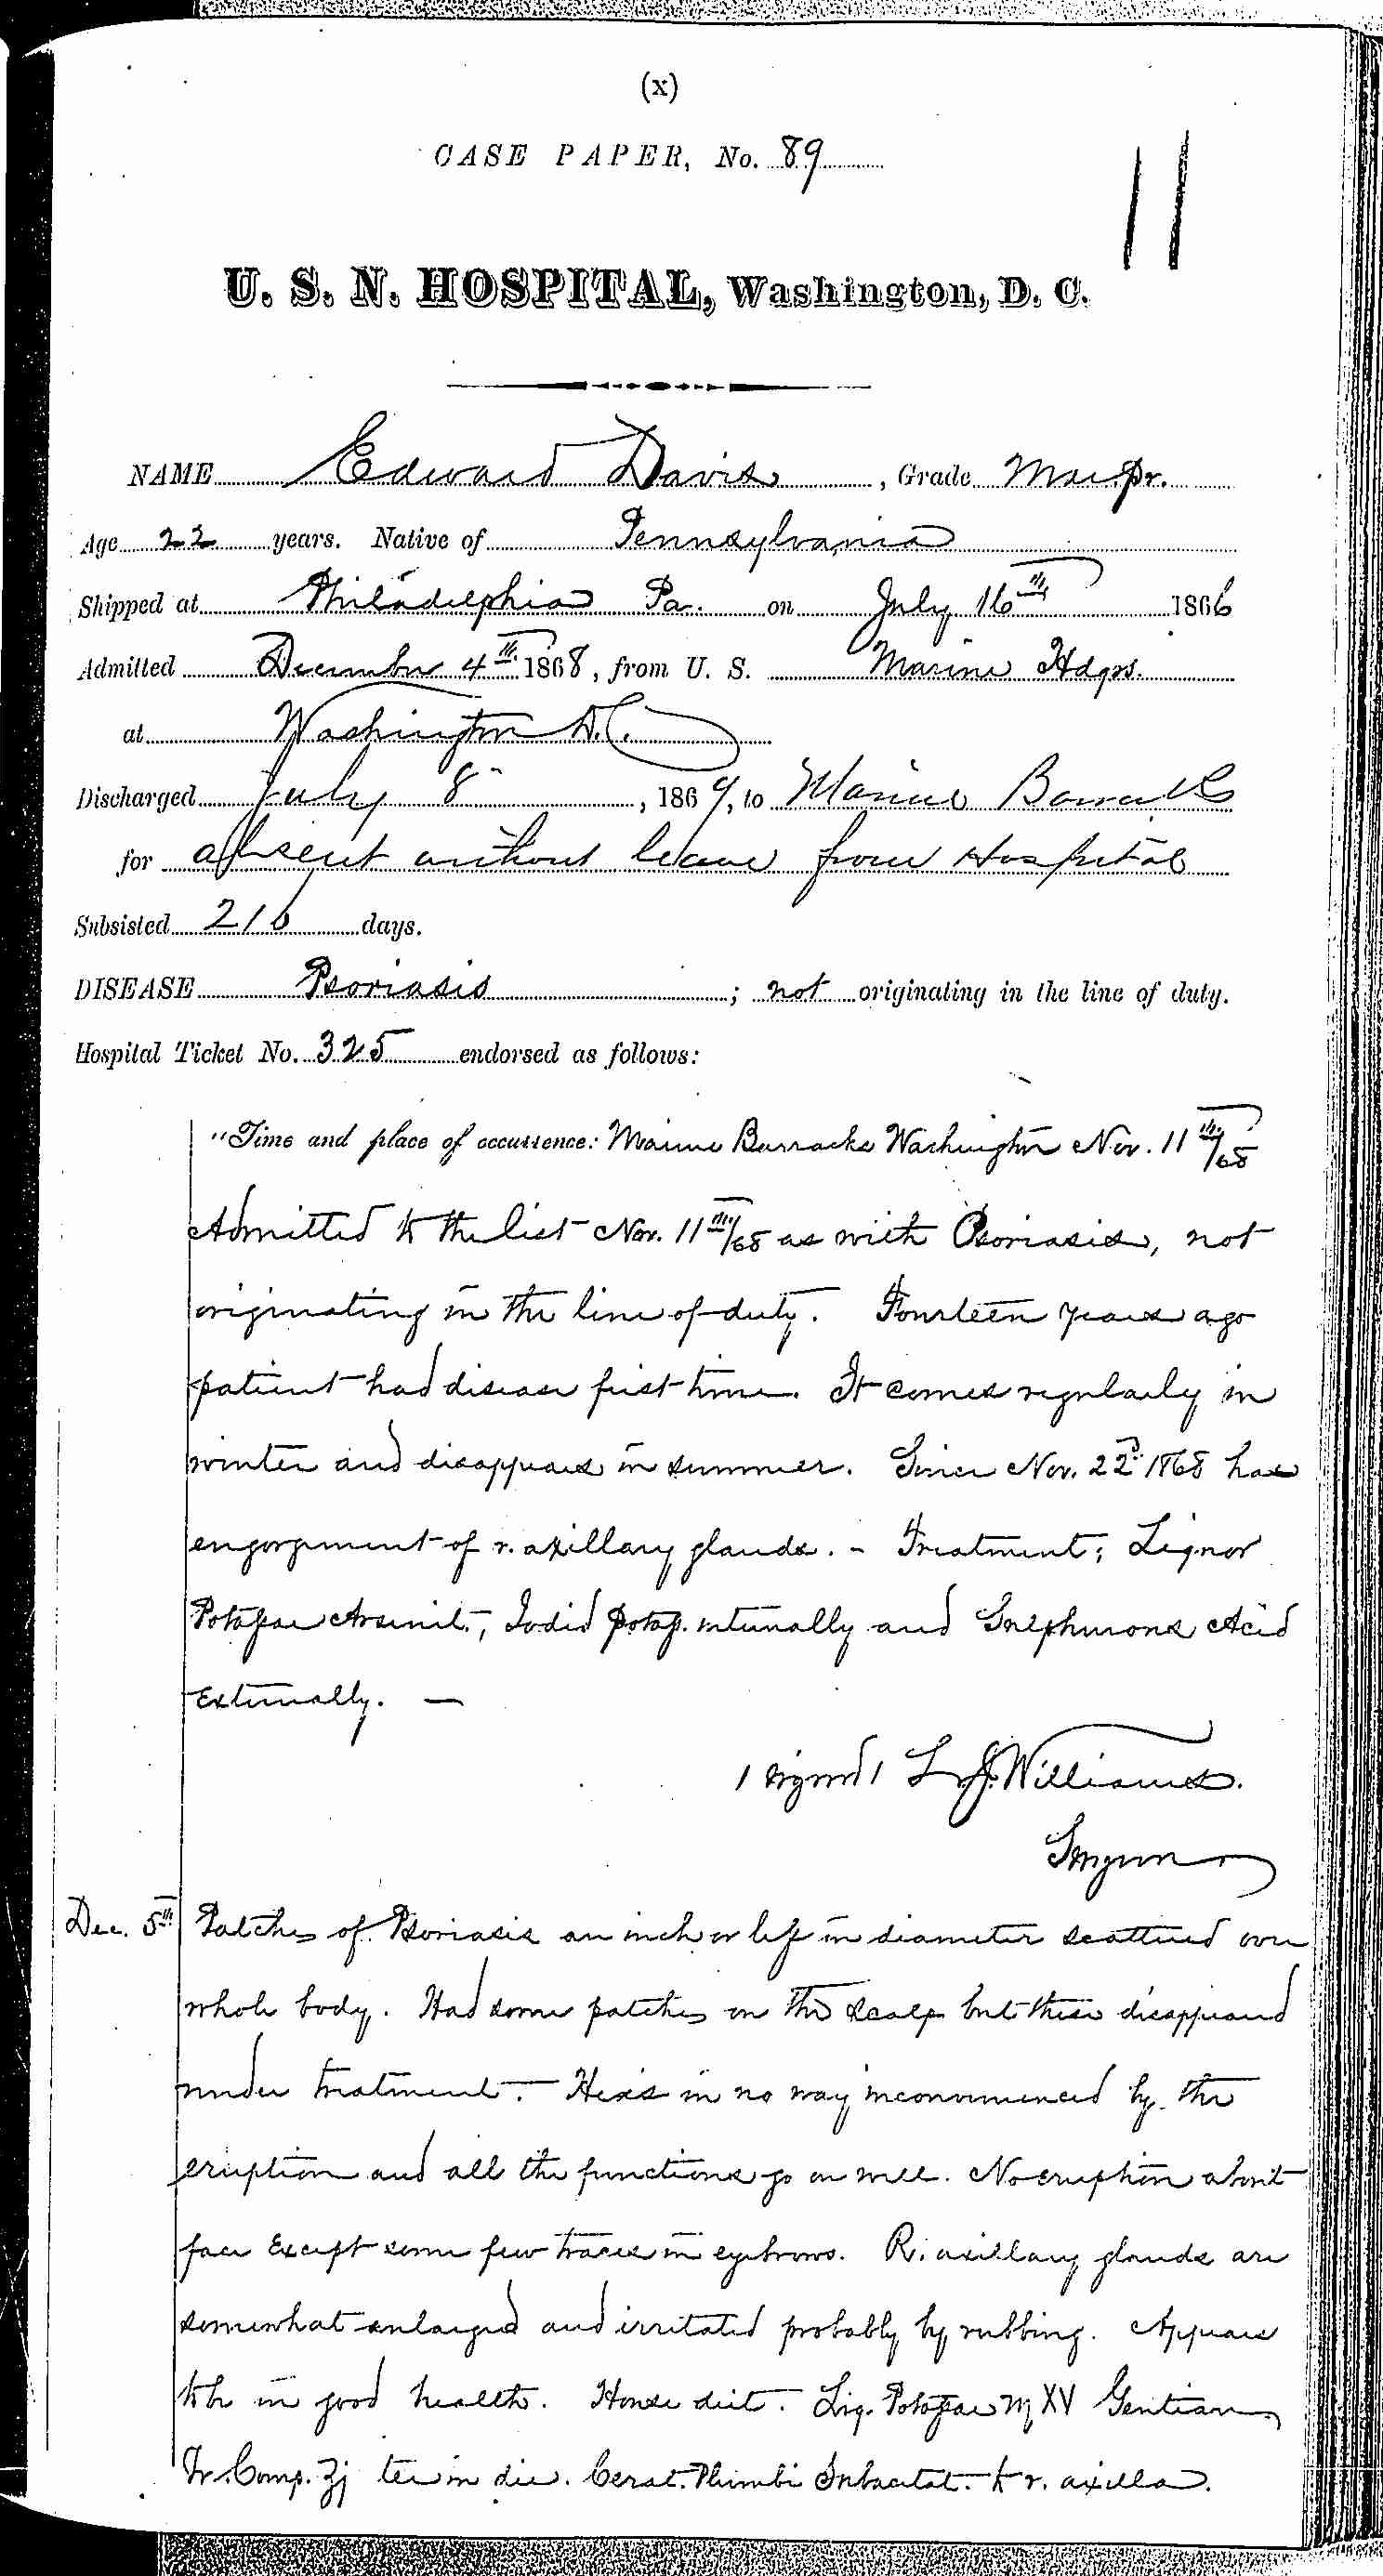 Entry for Edward Davis (page 1 of 6) in the log Hospital Tickets and Case Papers - Naval Hospital - Washington, D.C. - 1868-69